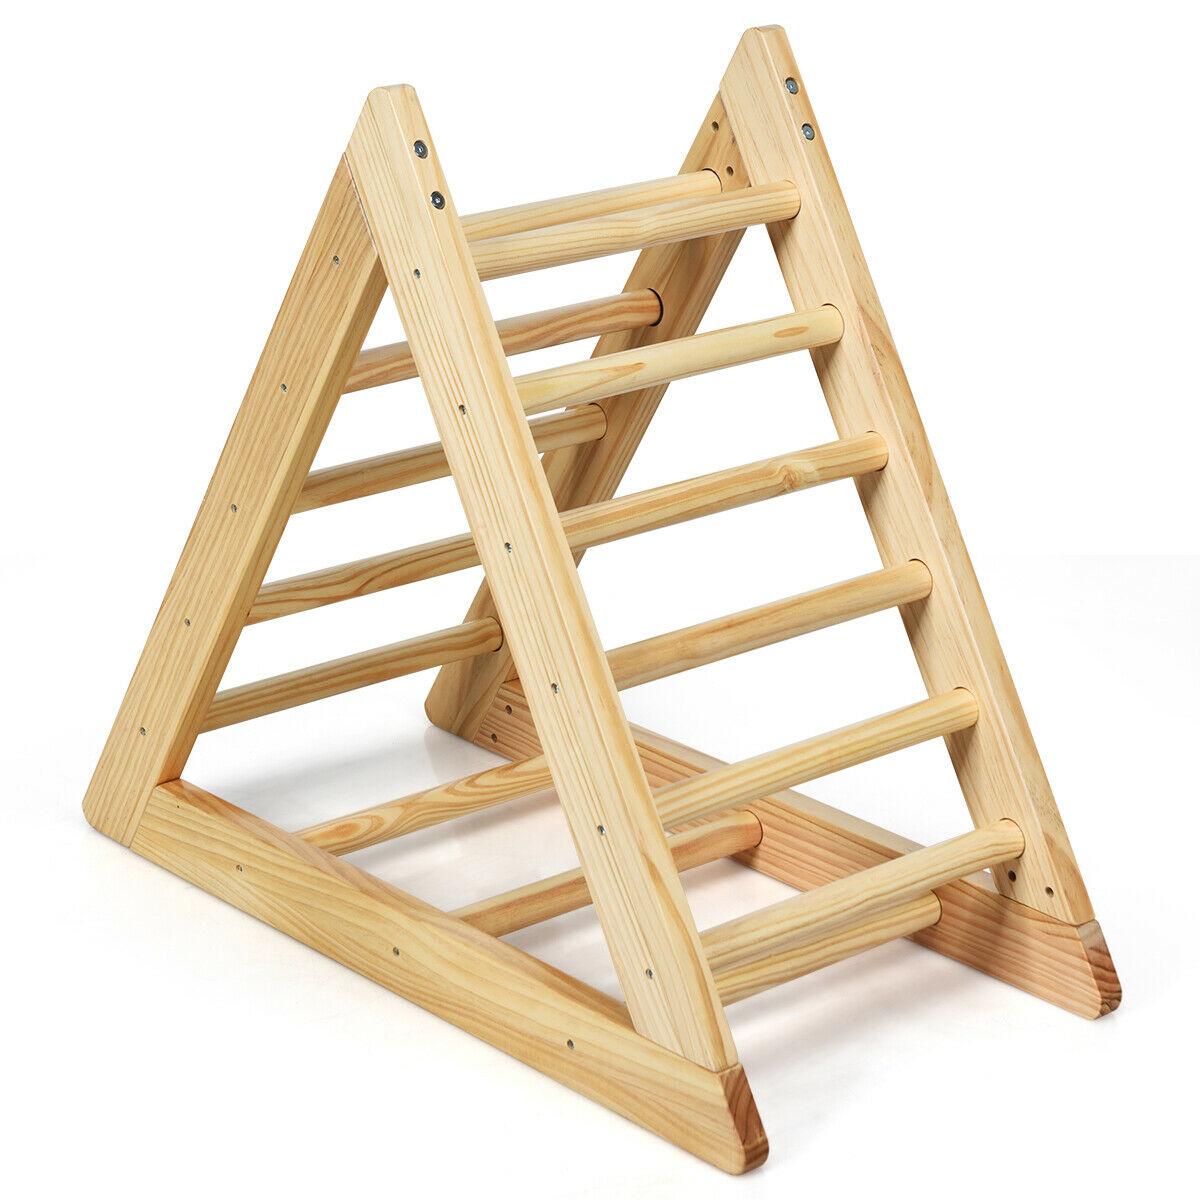 Children Wooden Climbing Ladder with 3 Difficulty Levels